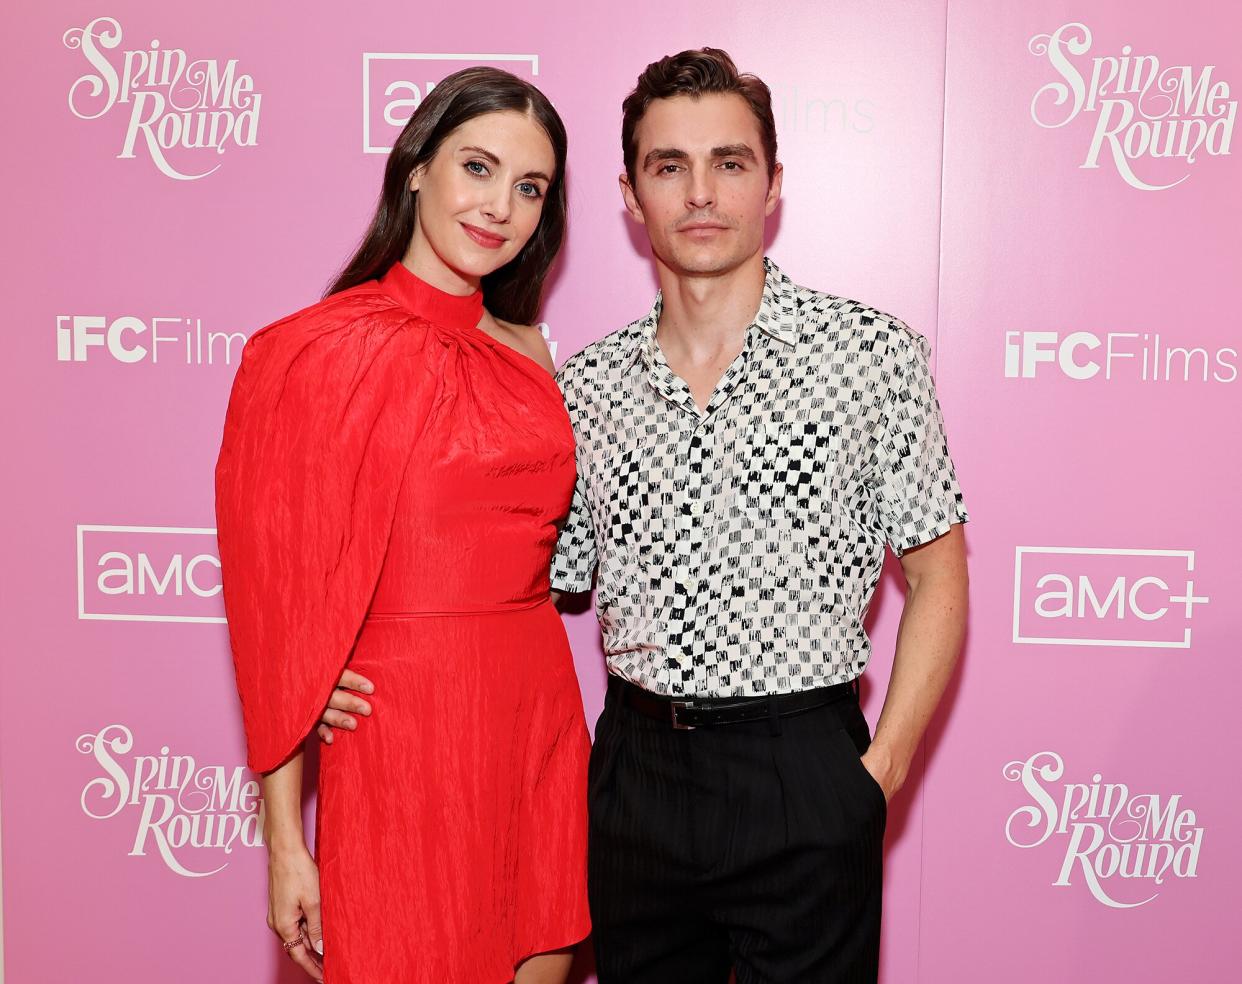 Alison Brie and Dave Franco attend the Los Angeles Special Screening of IFC Films' "Spin Me Round" at The London West Hollywood at Beverly Hills on August 17, 2022 in West Hollywood, California.